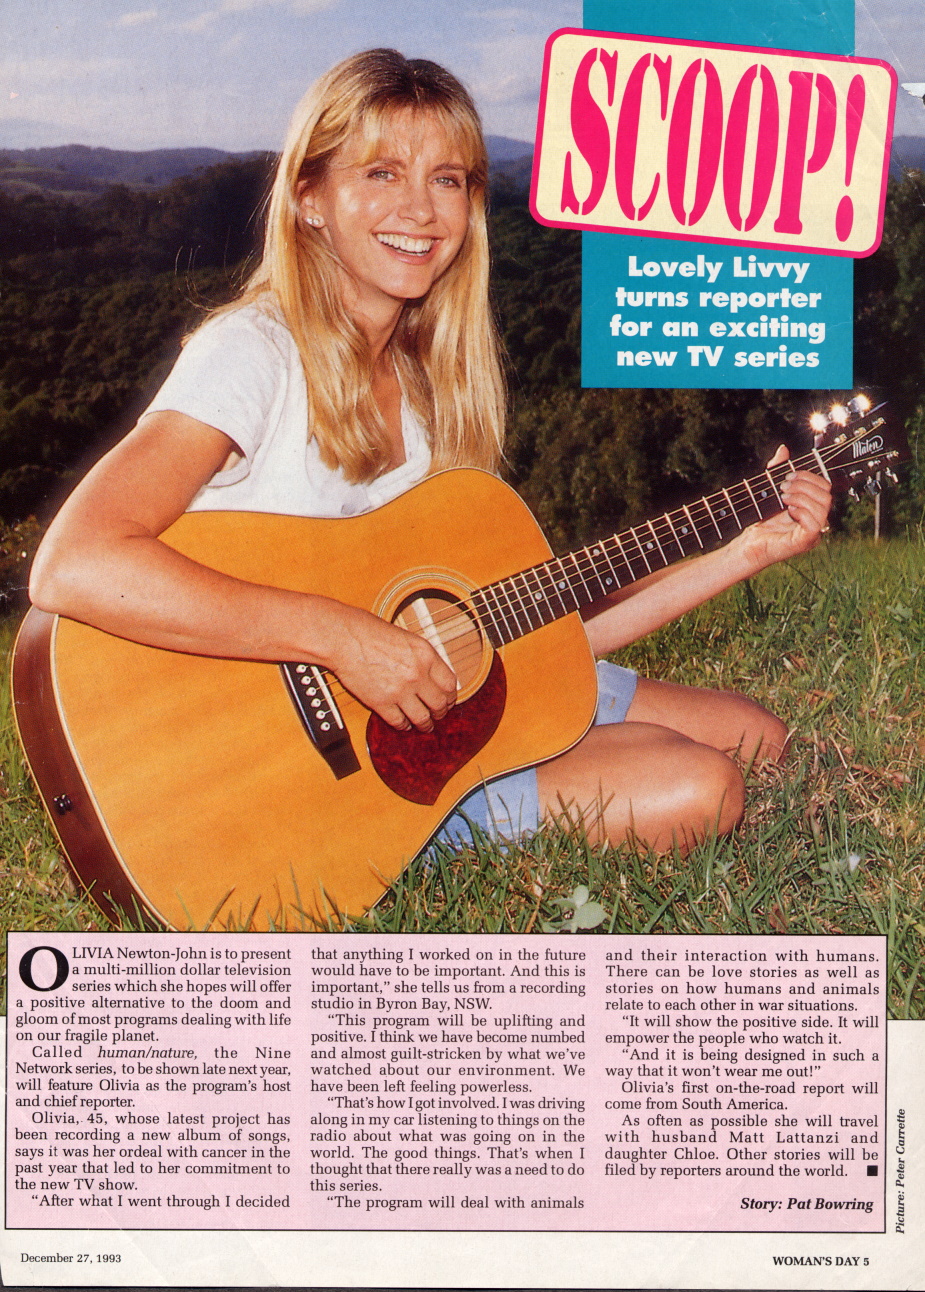 Scoop Lovely Livvy turns reporter - Woman's Day